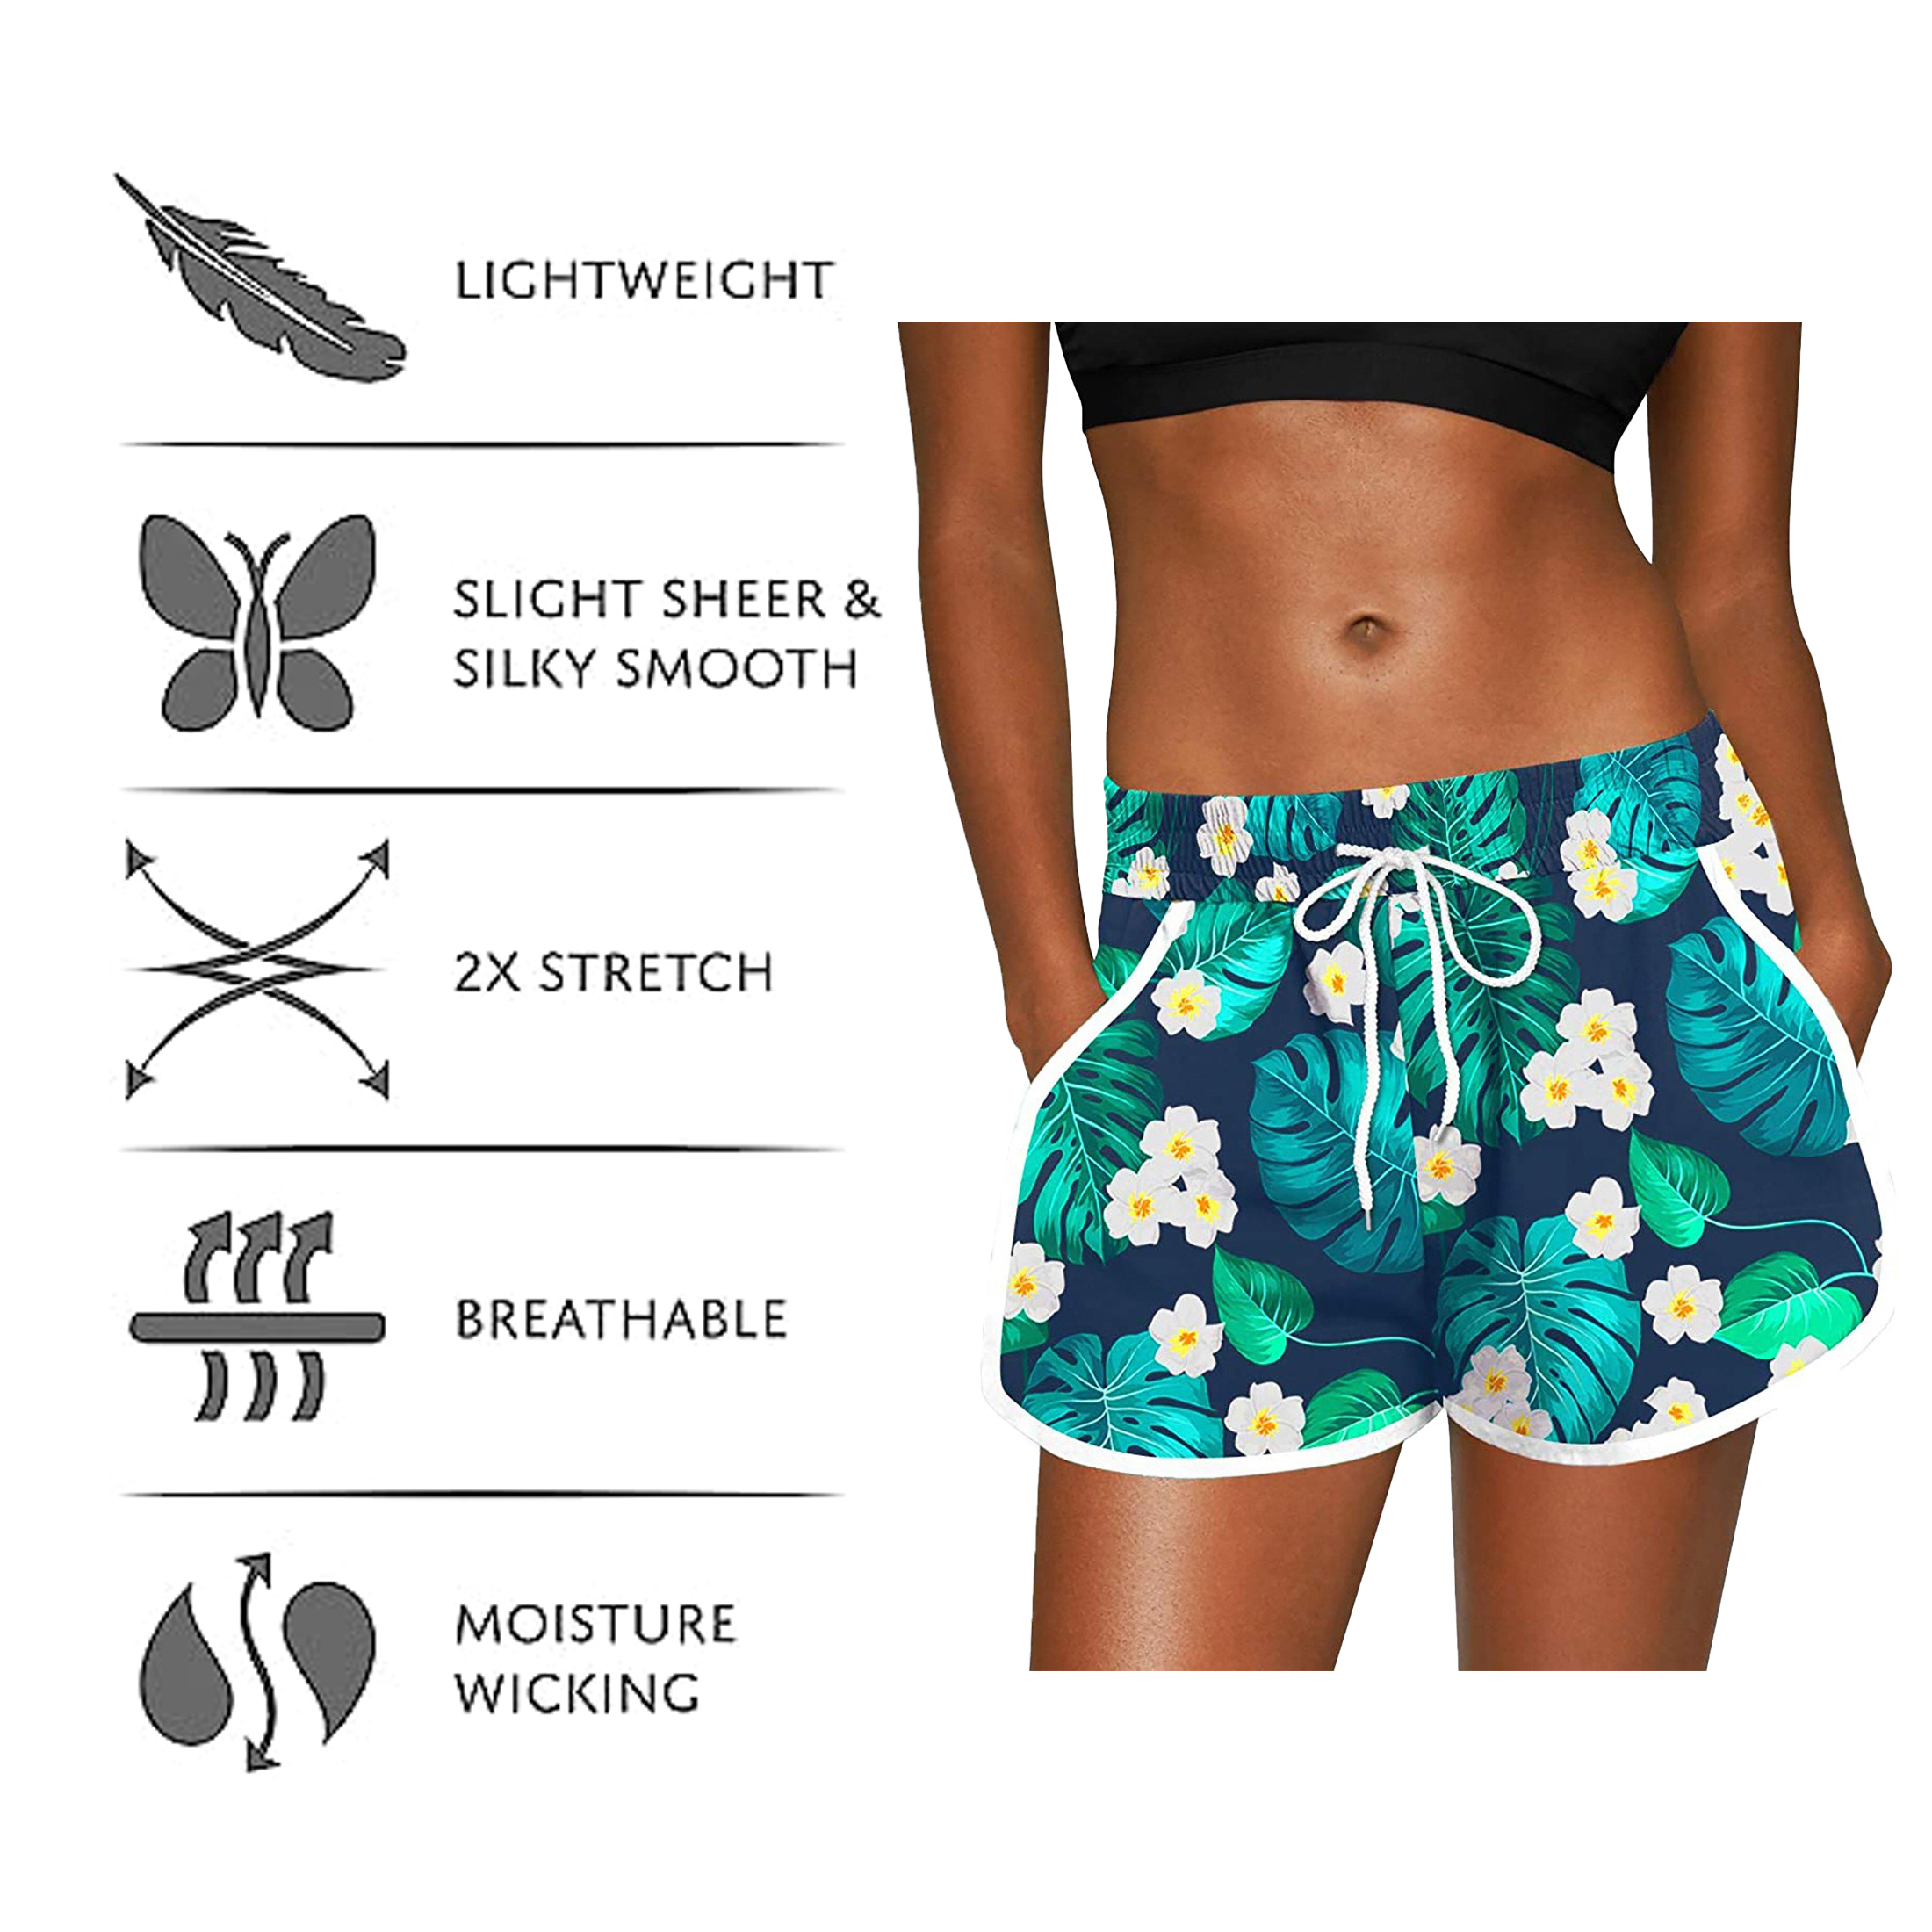 2-Pack Women's Floral Printed Shorts Elastic Waist Drawstring Summer Lounge Wear Pants Casual Dolphin Shorts With Pockets Quick Dry - L